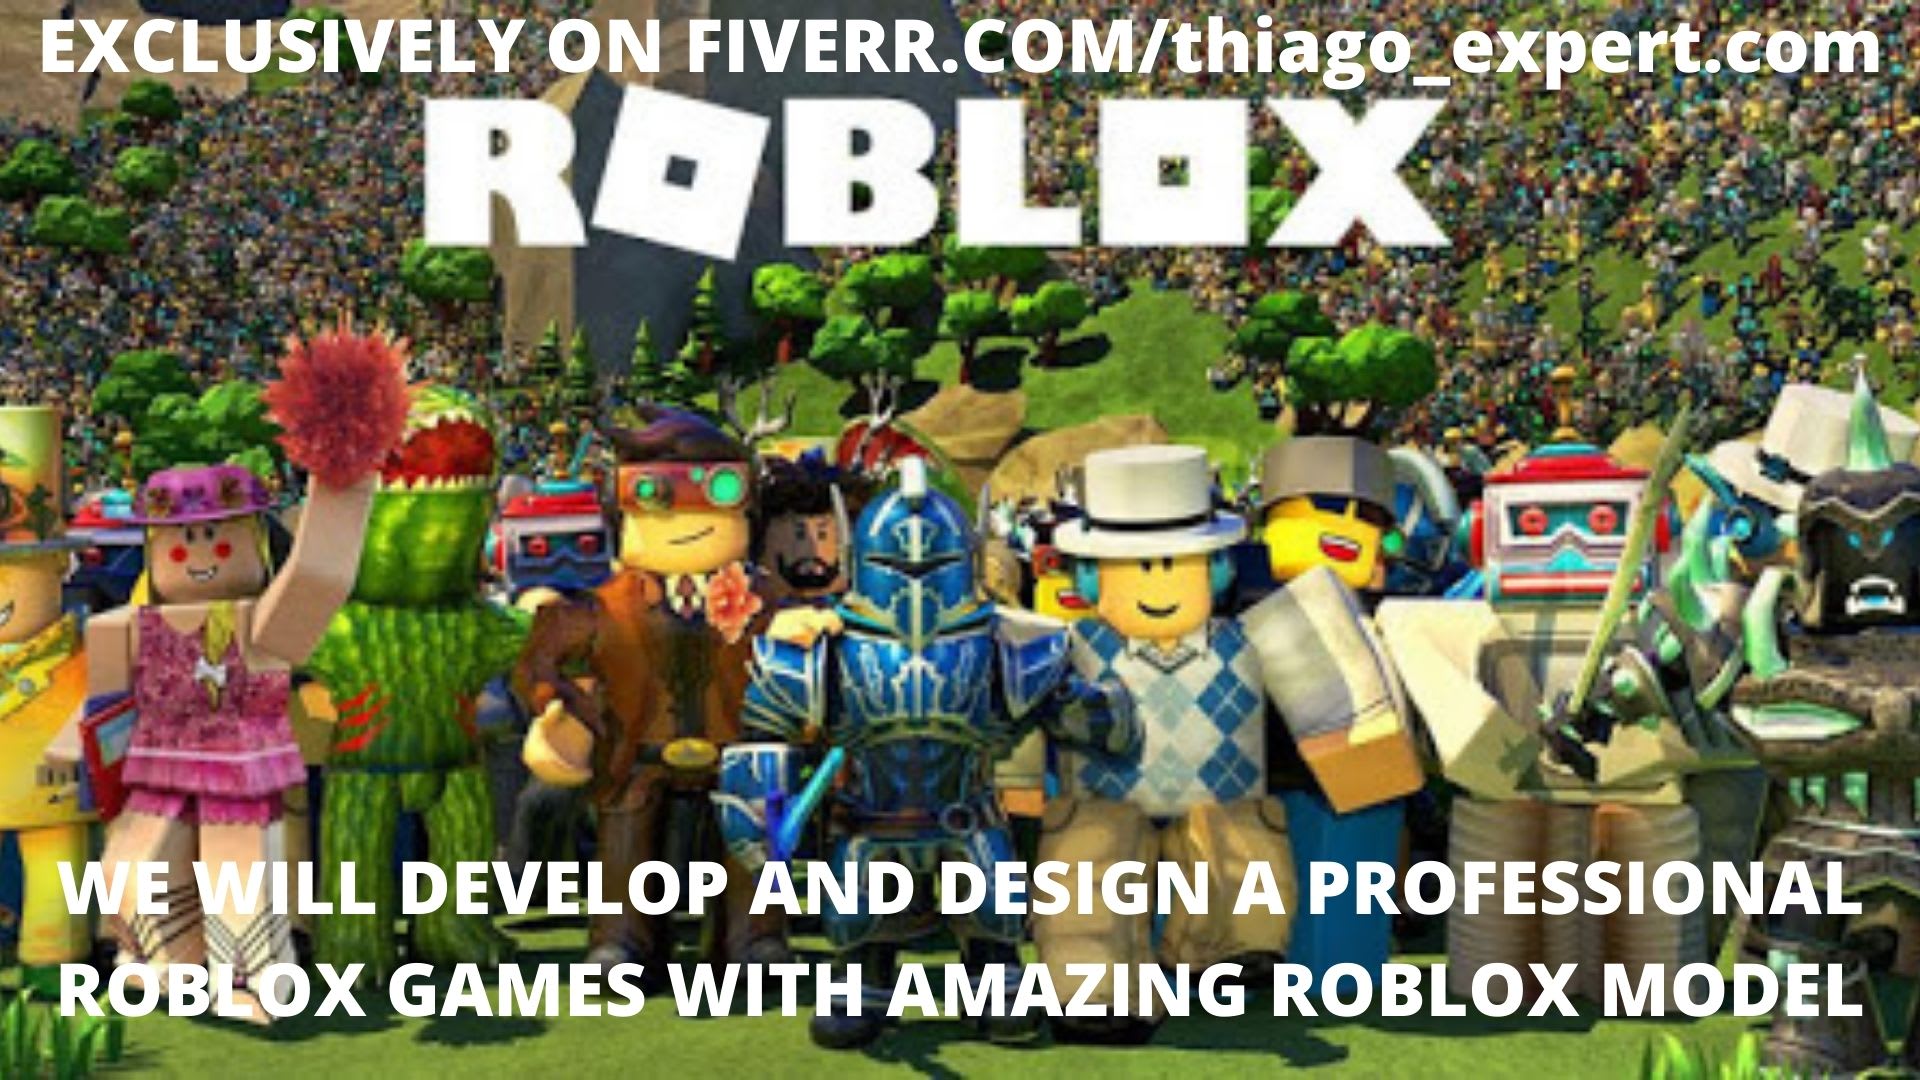 Build A Profitable Roblox Unity Game With Amazing Models For Your Game By Thiago Expert Fiverr - how to make a profitable roblox game